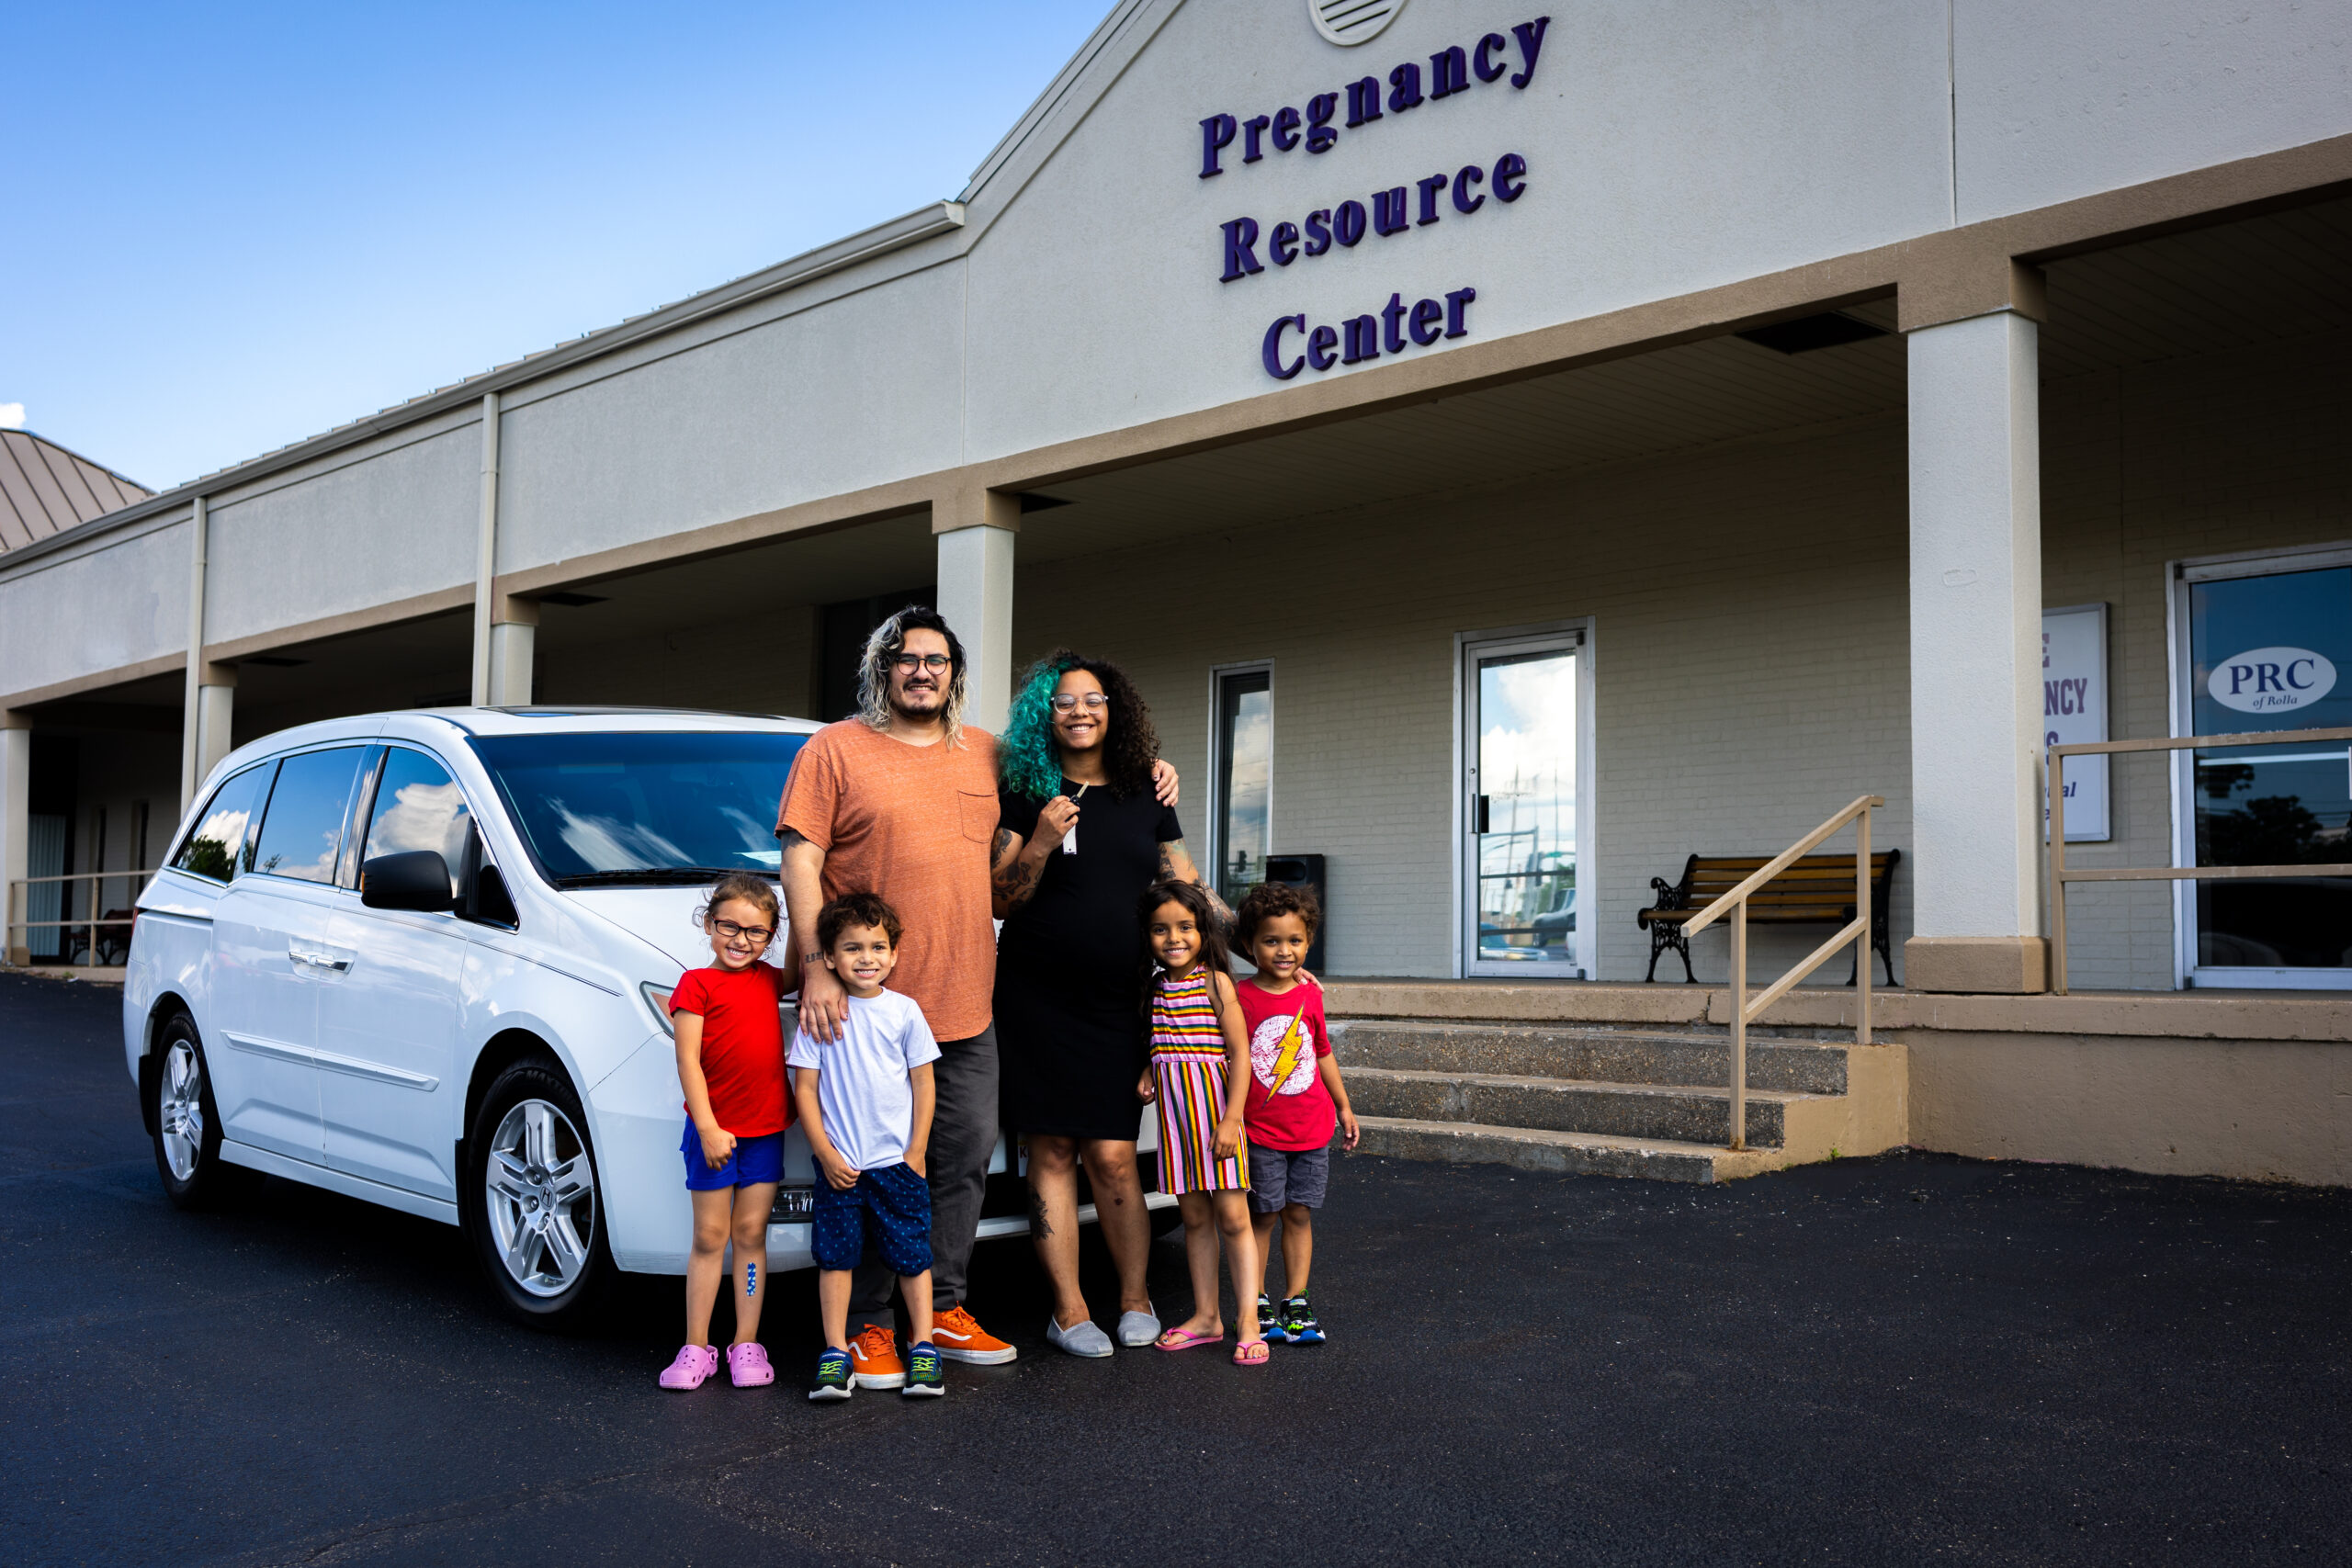 Man and woman with four children in front of a car at a pregnancy resource center